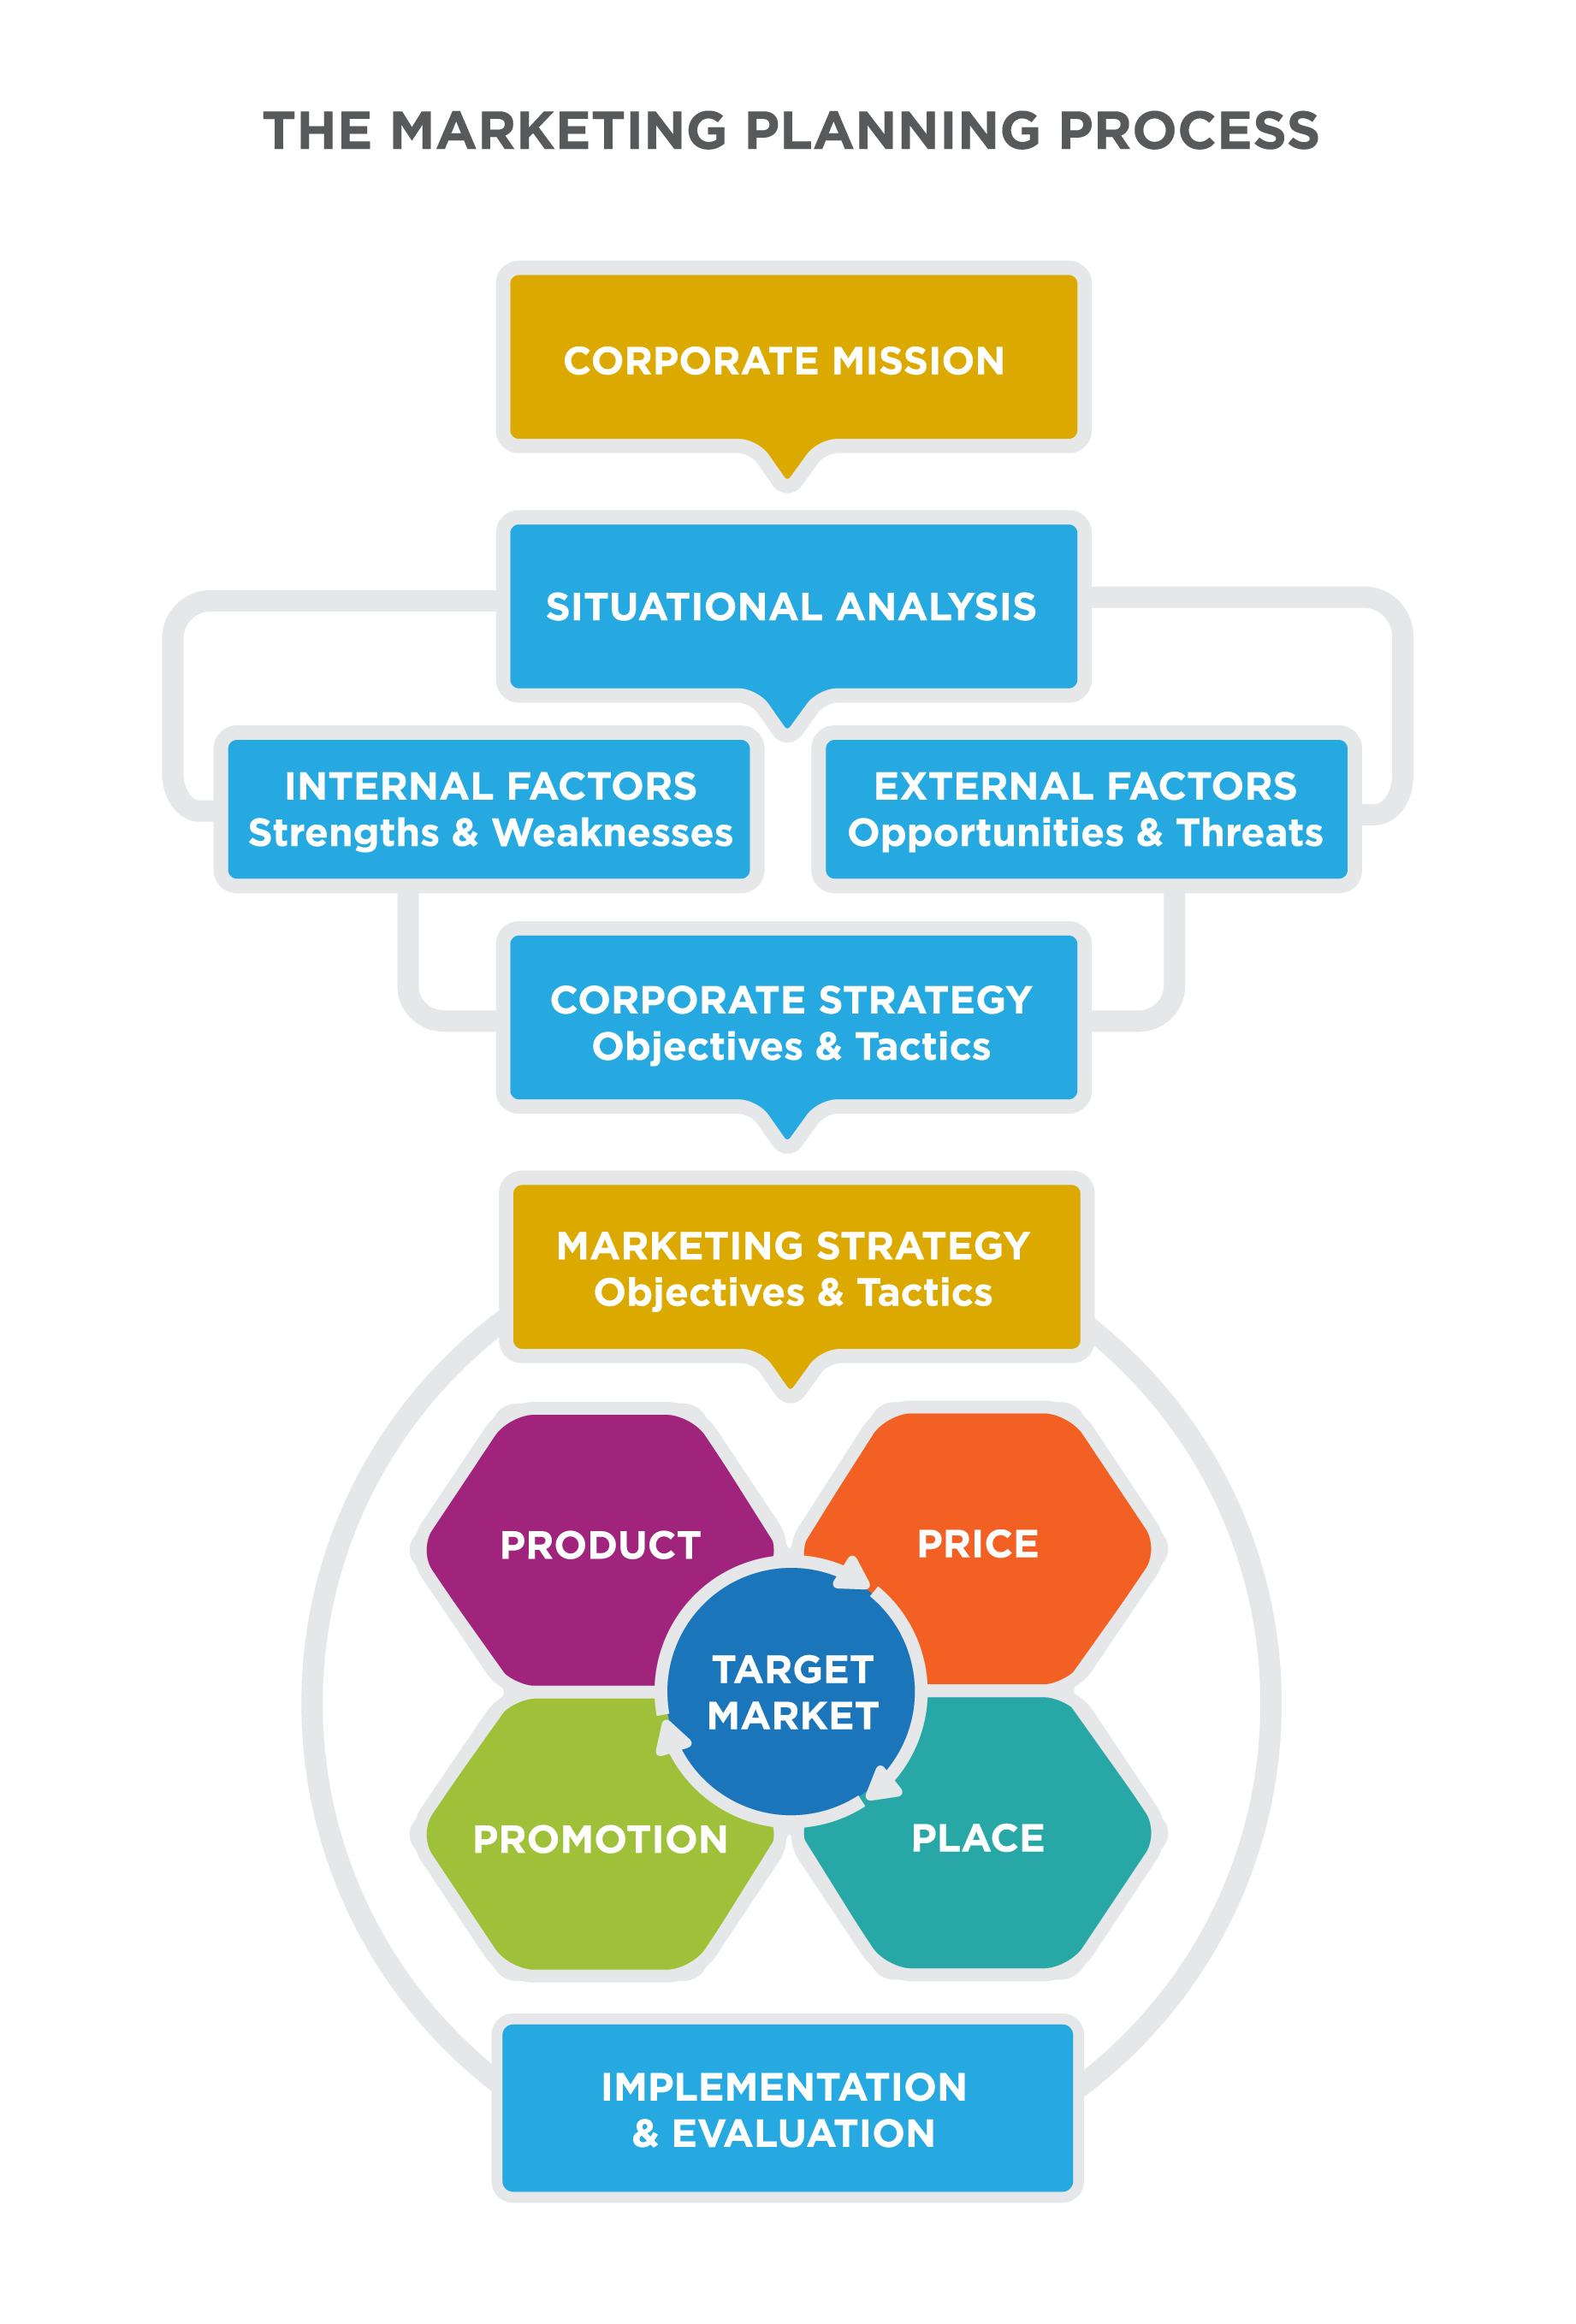 The Marketing Planning Process: a 7 layer process. Corporate Mission leads to Situational Analysis which leads to both Internal Factors (Strengths & Weaknesses) and External Factors (Opportunities & Threats). These both lead to Corporate Strategy (Objectives & Tactics) which leads to Marketing Strategy (Objectives & Tactics) which leads to the four Ps: Product, Price, Place, and Promotion which all center around the Target Market. The final layer is Implementation and Evaluation.